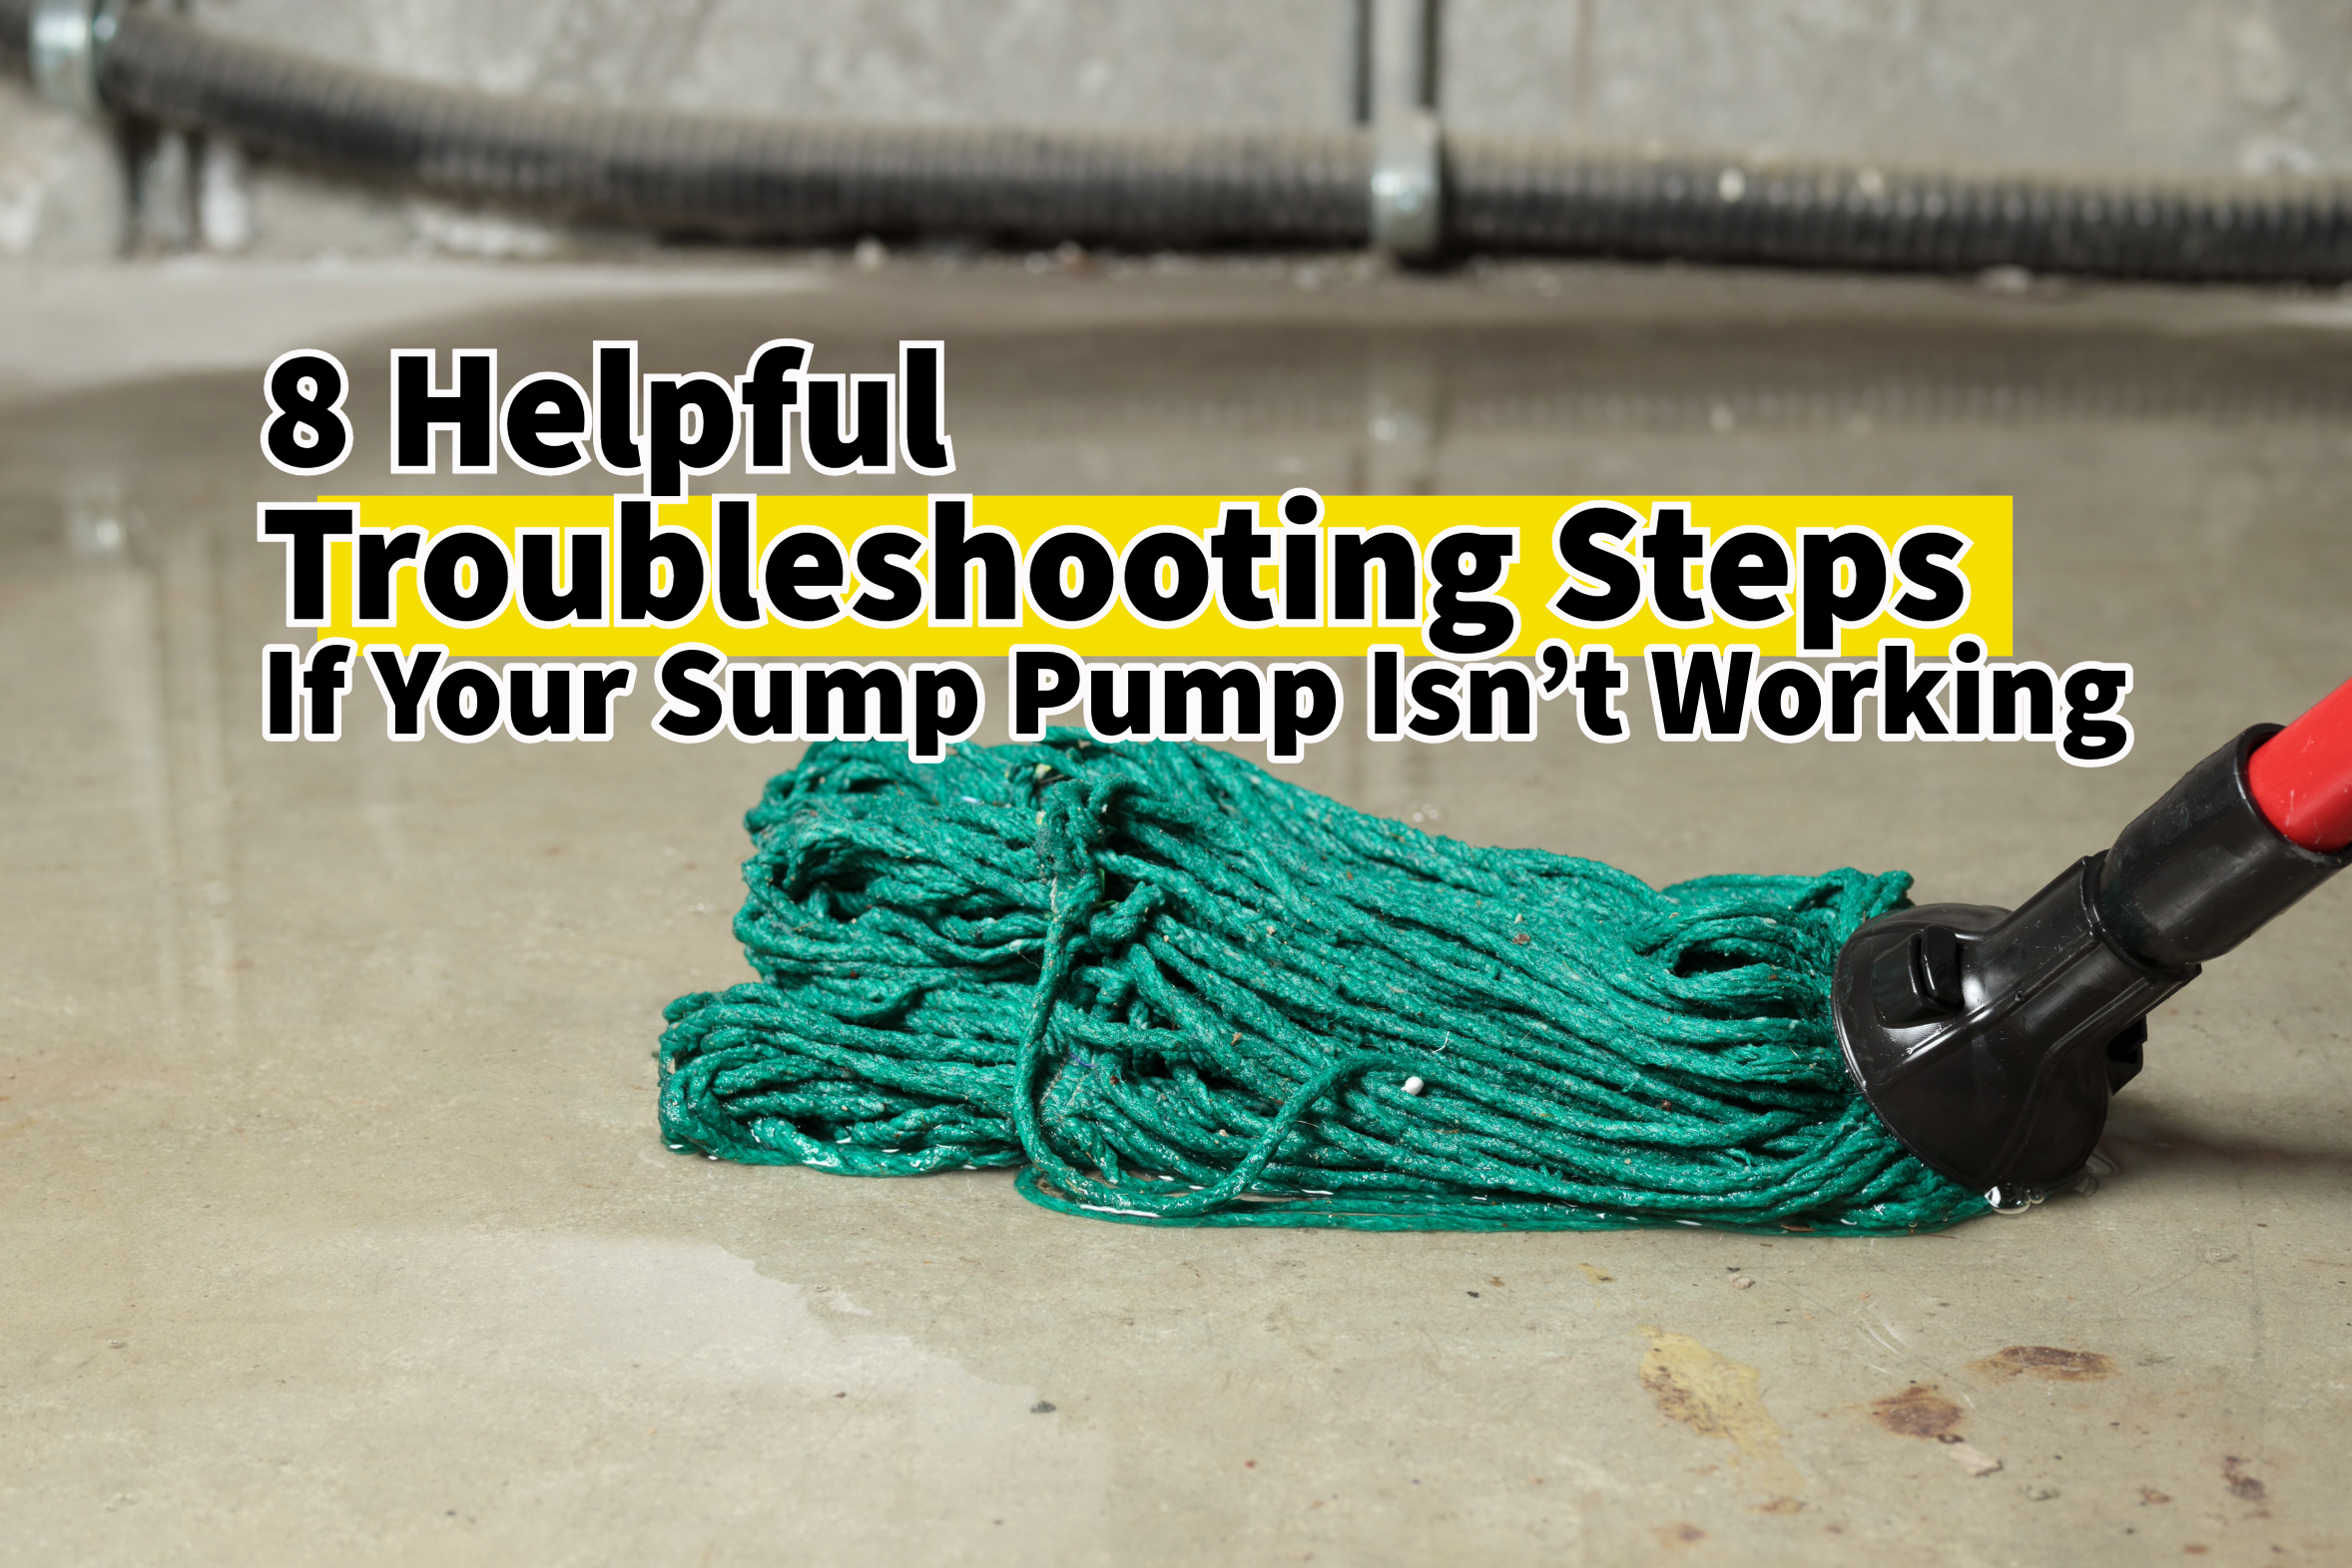 A homeowner’s guide to troubleshooting a malfunctioning sump pump. Plumbing and drain services in Springboro, Ohio.